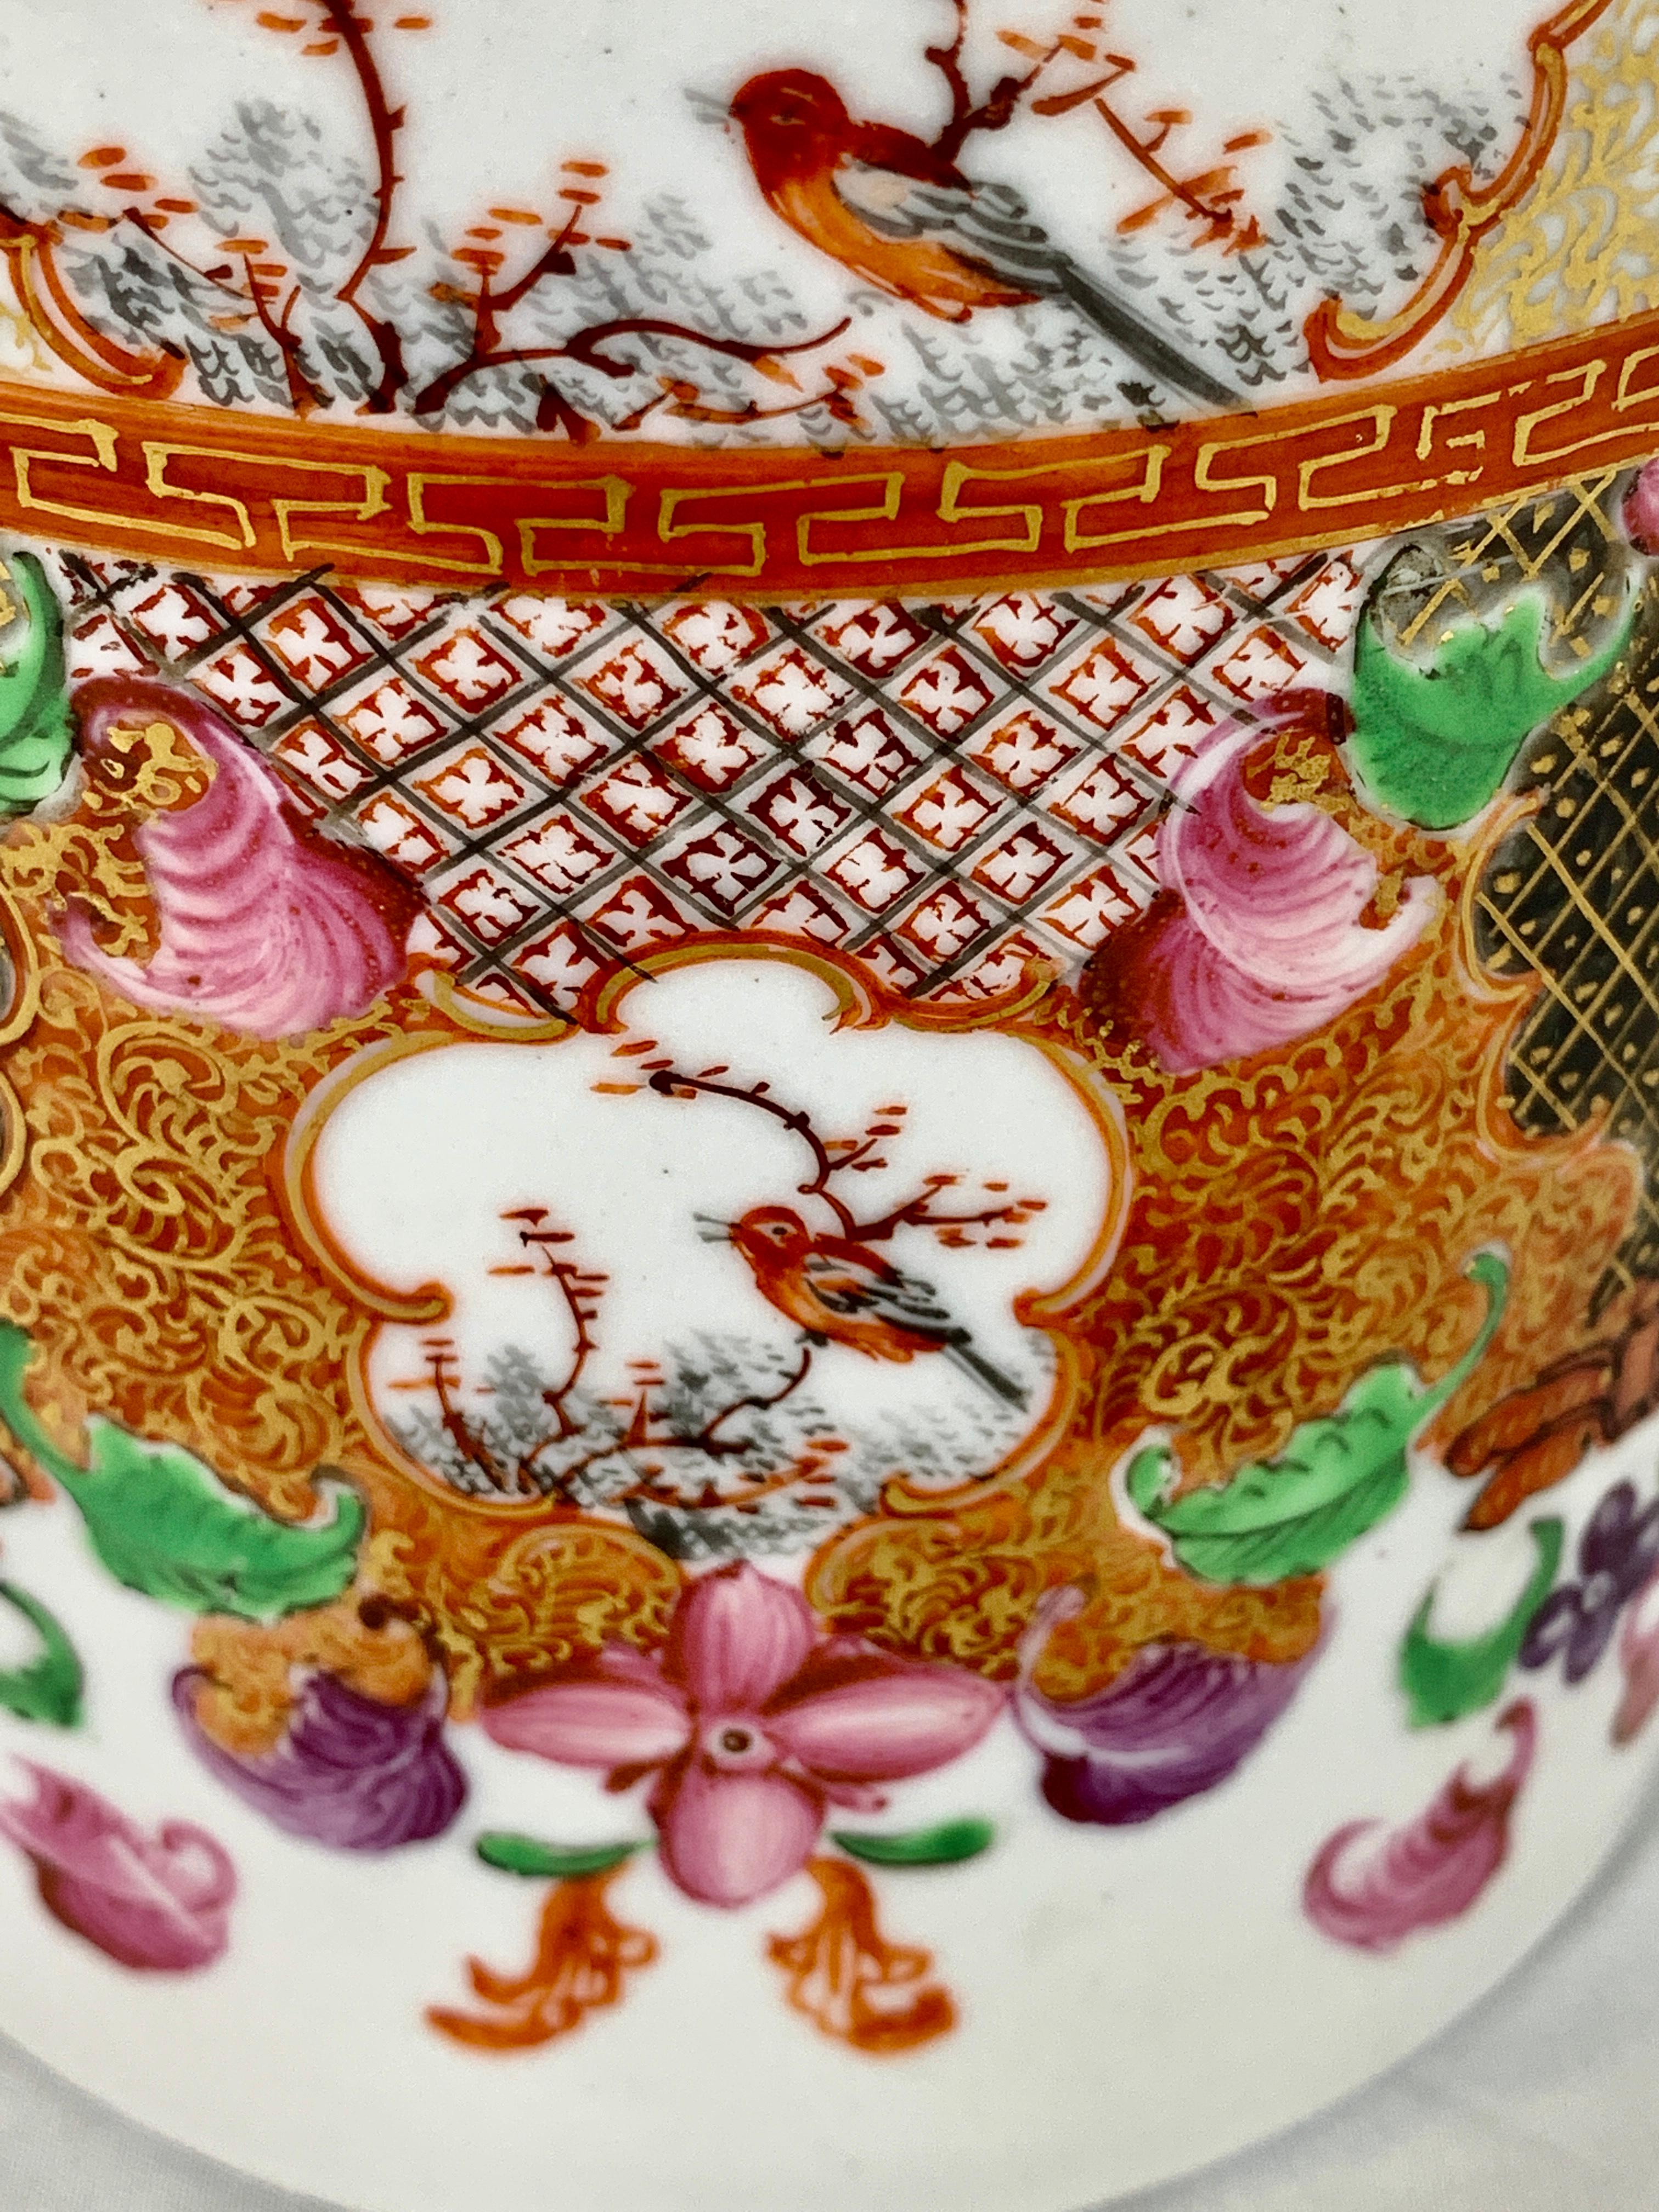 Provenance: The Private Collection of Mario Buatta
We purchased this mug from the estate of Mario Buatta.
Mario was our best client for four decades. He loved beautiful color combinations on porcelain.
This large and exquisite Chinese mug is hand